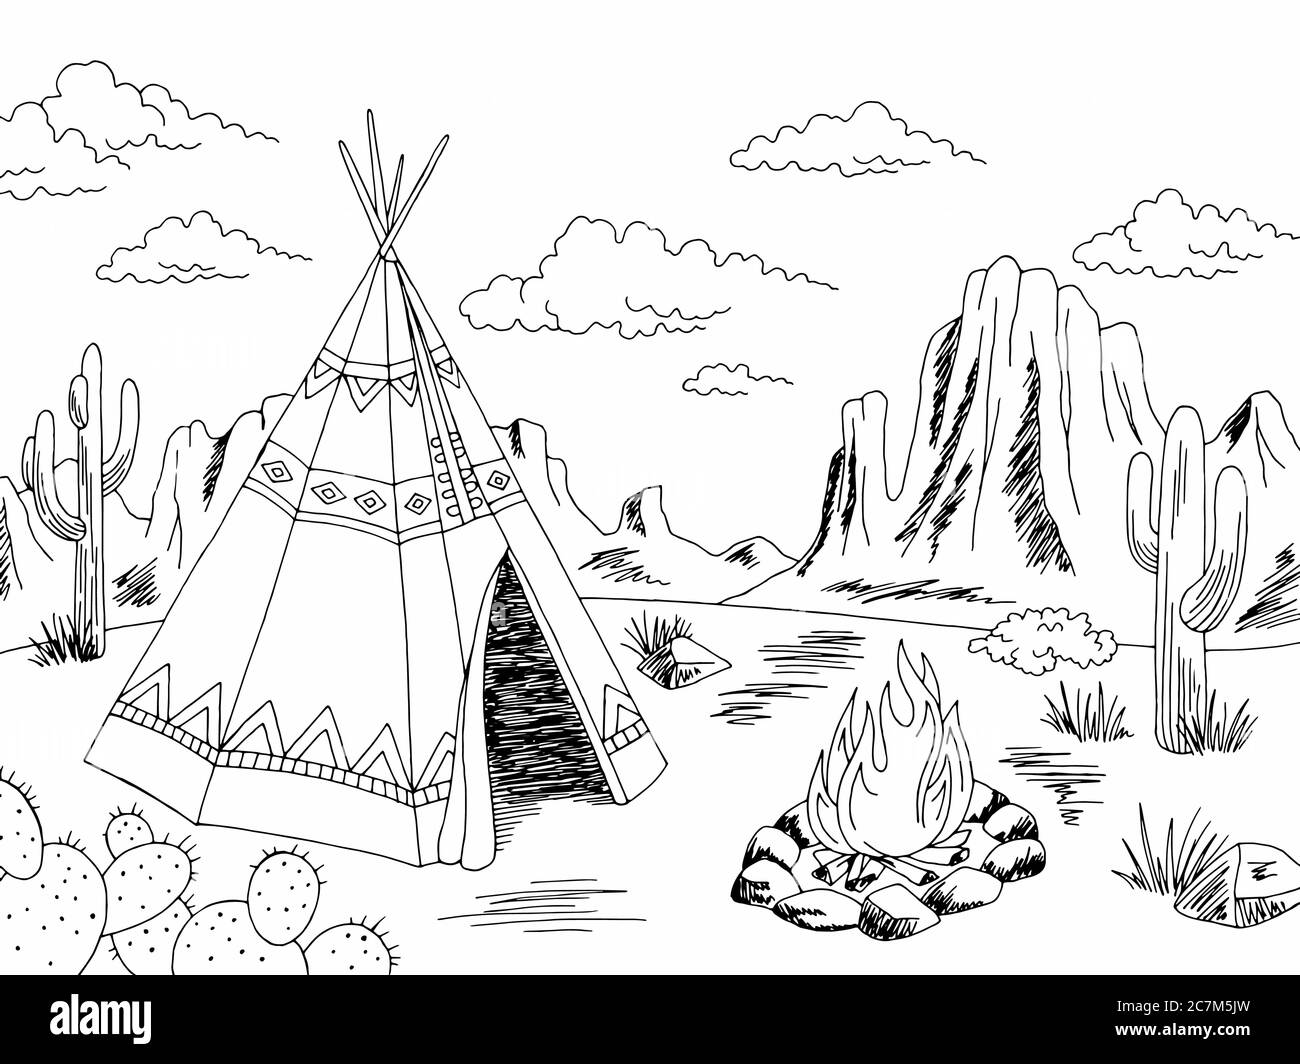 Wigwam cut out stock images pictures